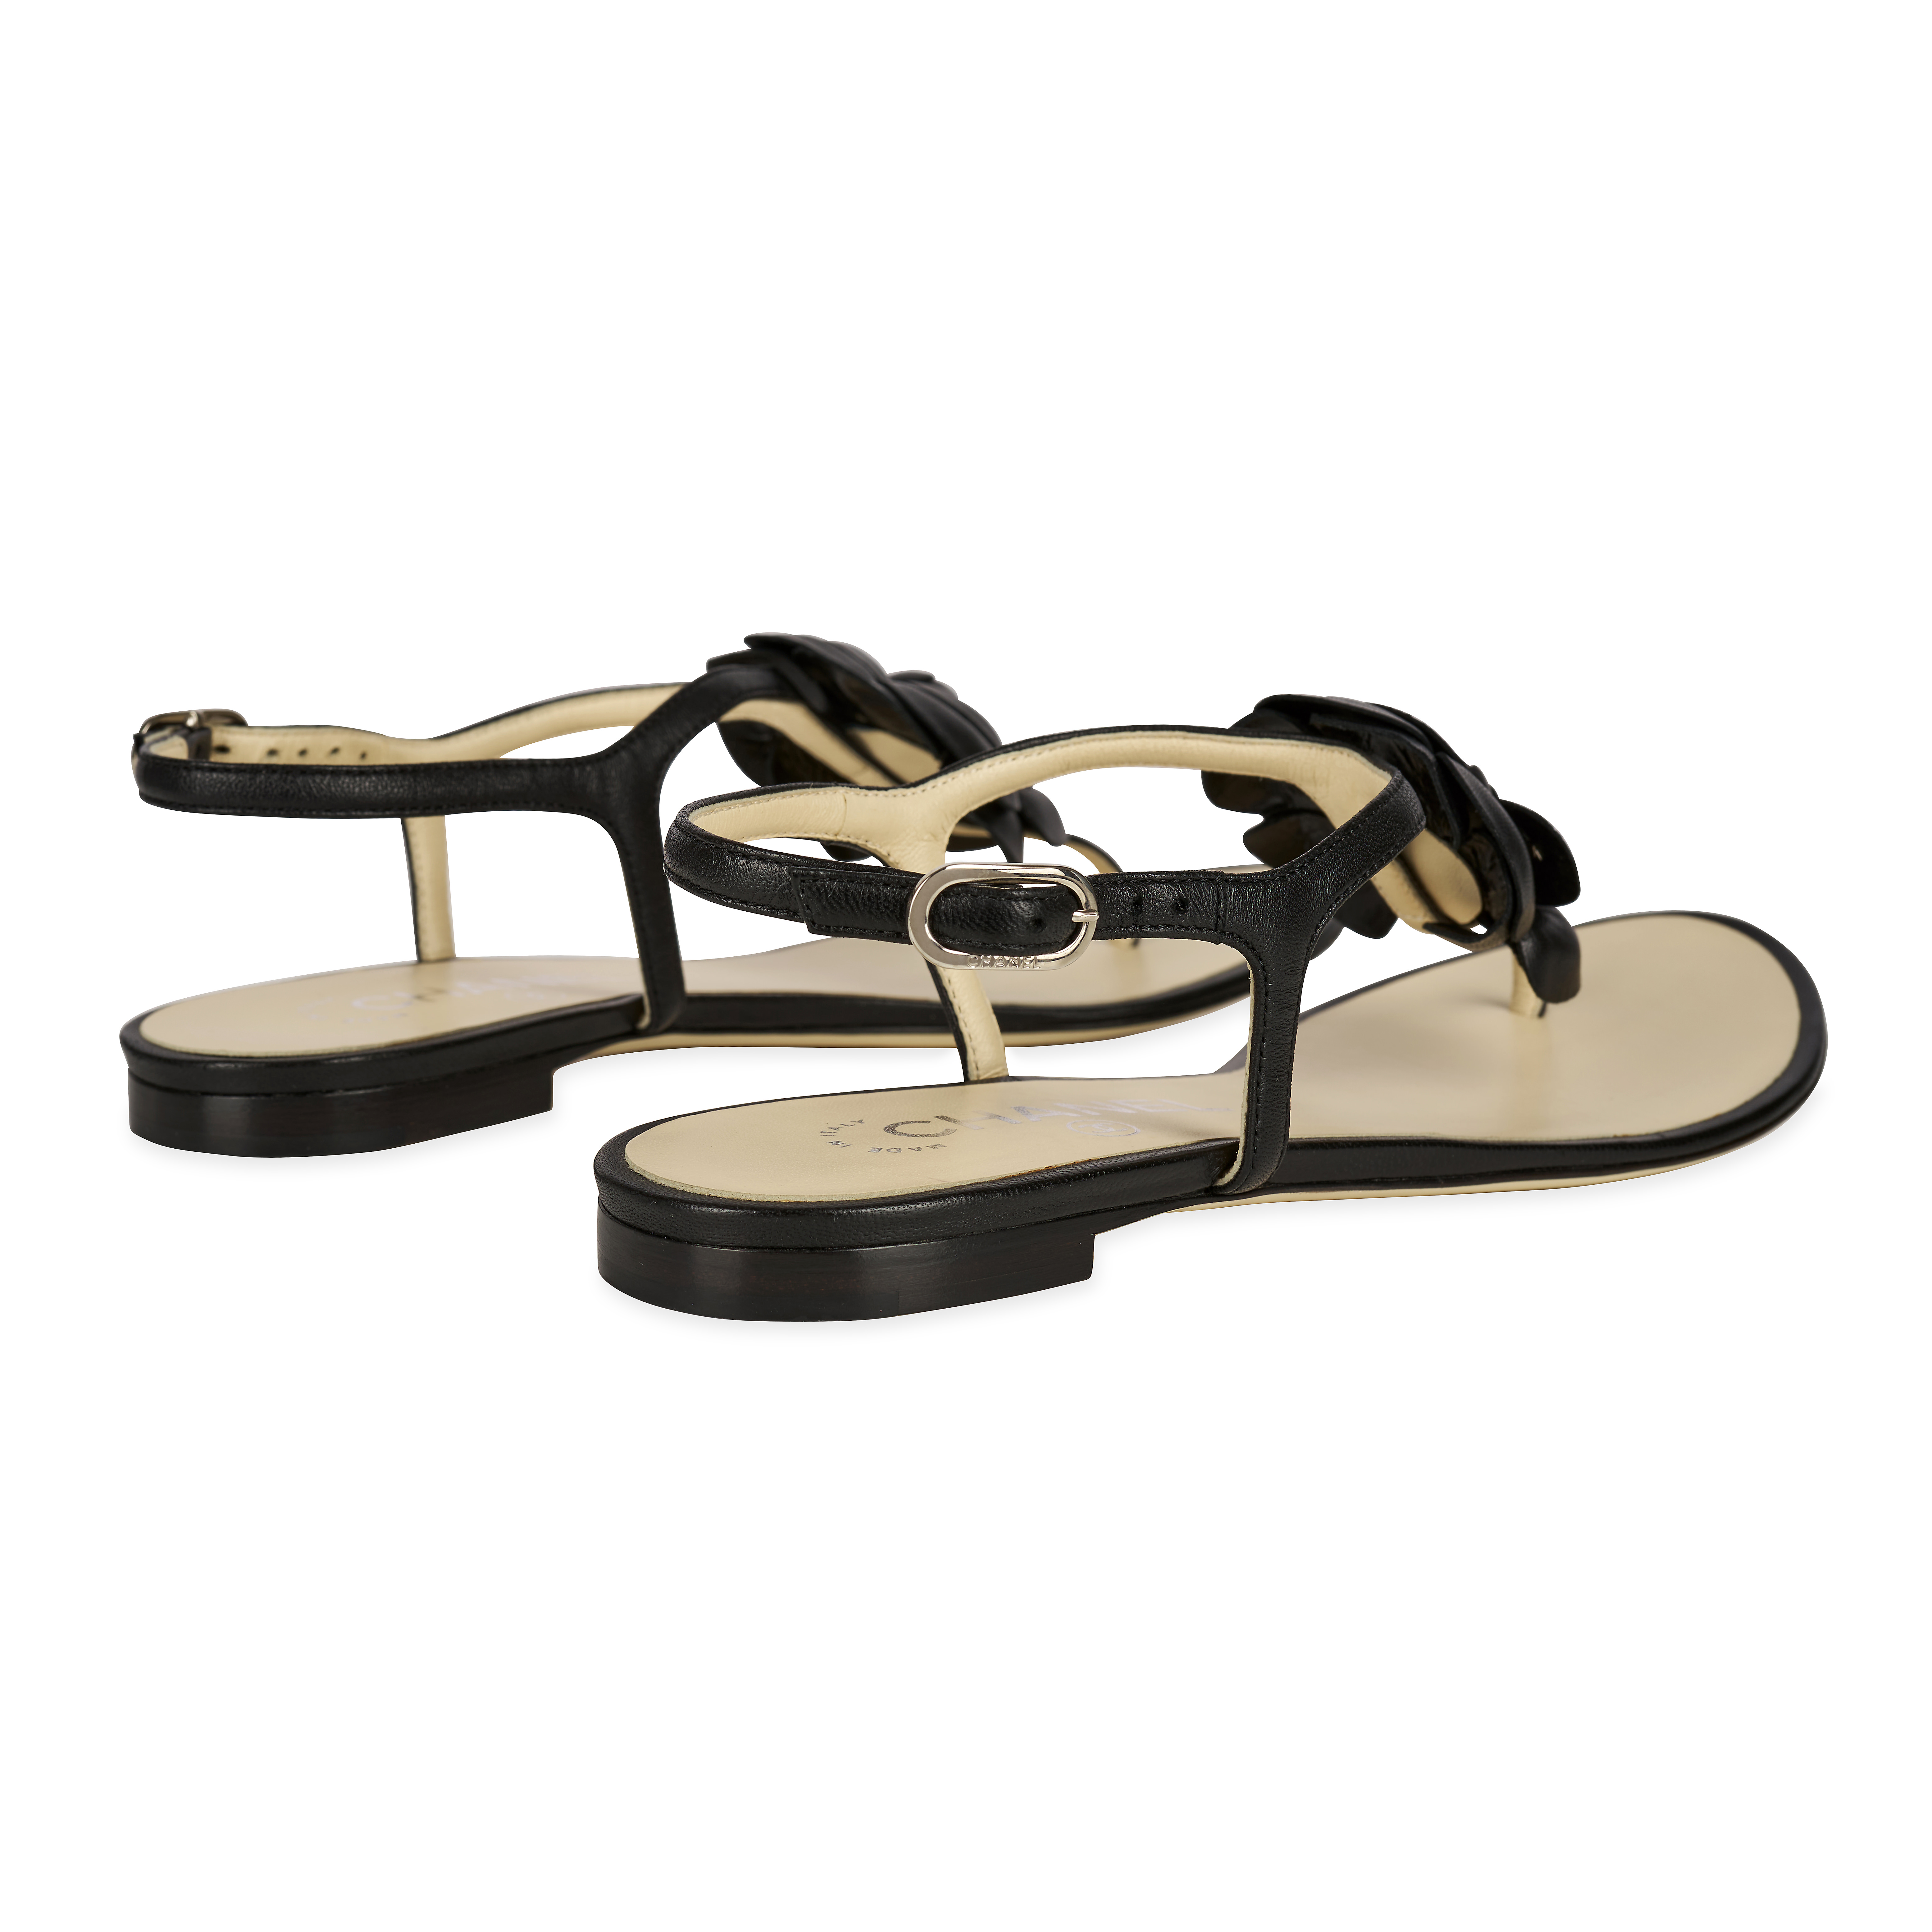 CHANEL CAMELLIA BEIGE AND BLACK SANDALS  Condition grade A-.  Size 37.5C. Black and beige leath... - Image 2 of 3